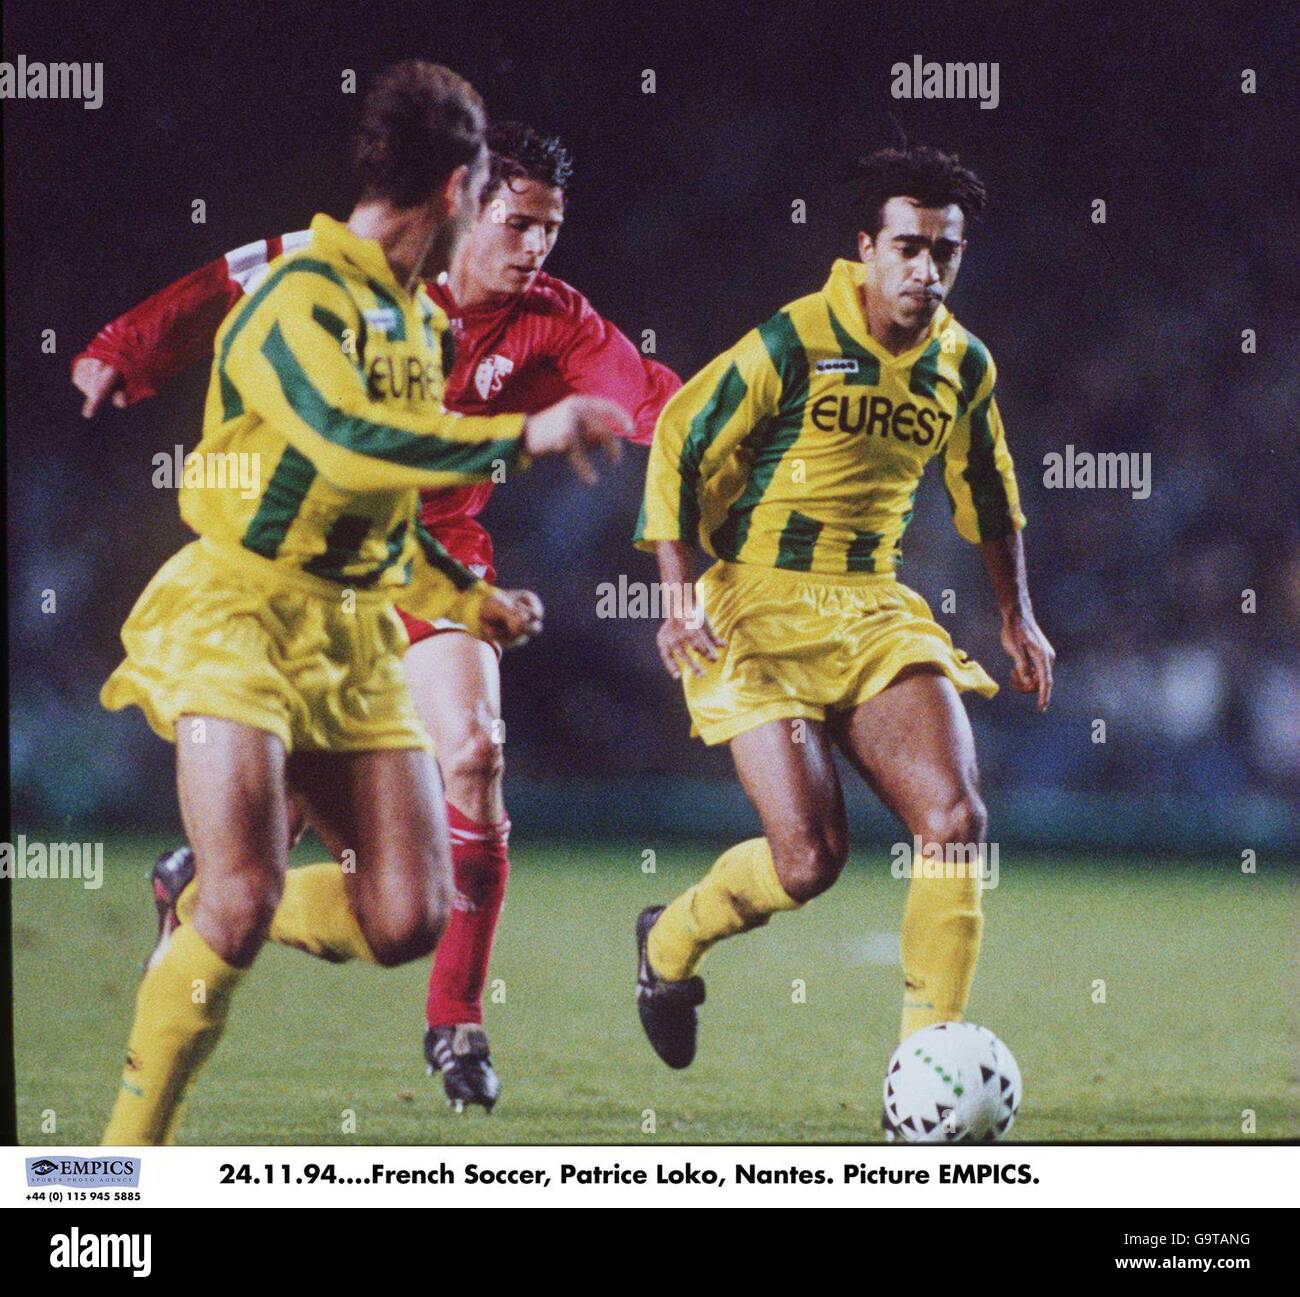 24.11.94. French Soccer, Patrice Loko, Nantes. Picture EMPICS. Stock Photo